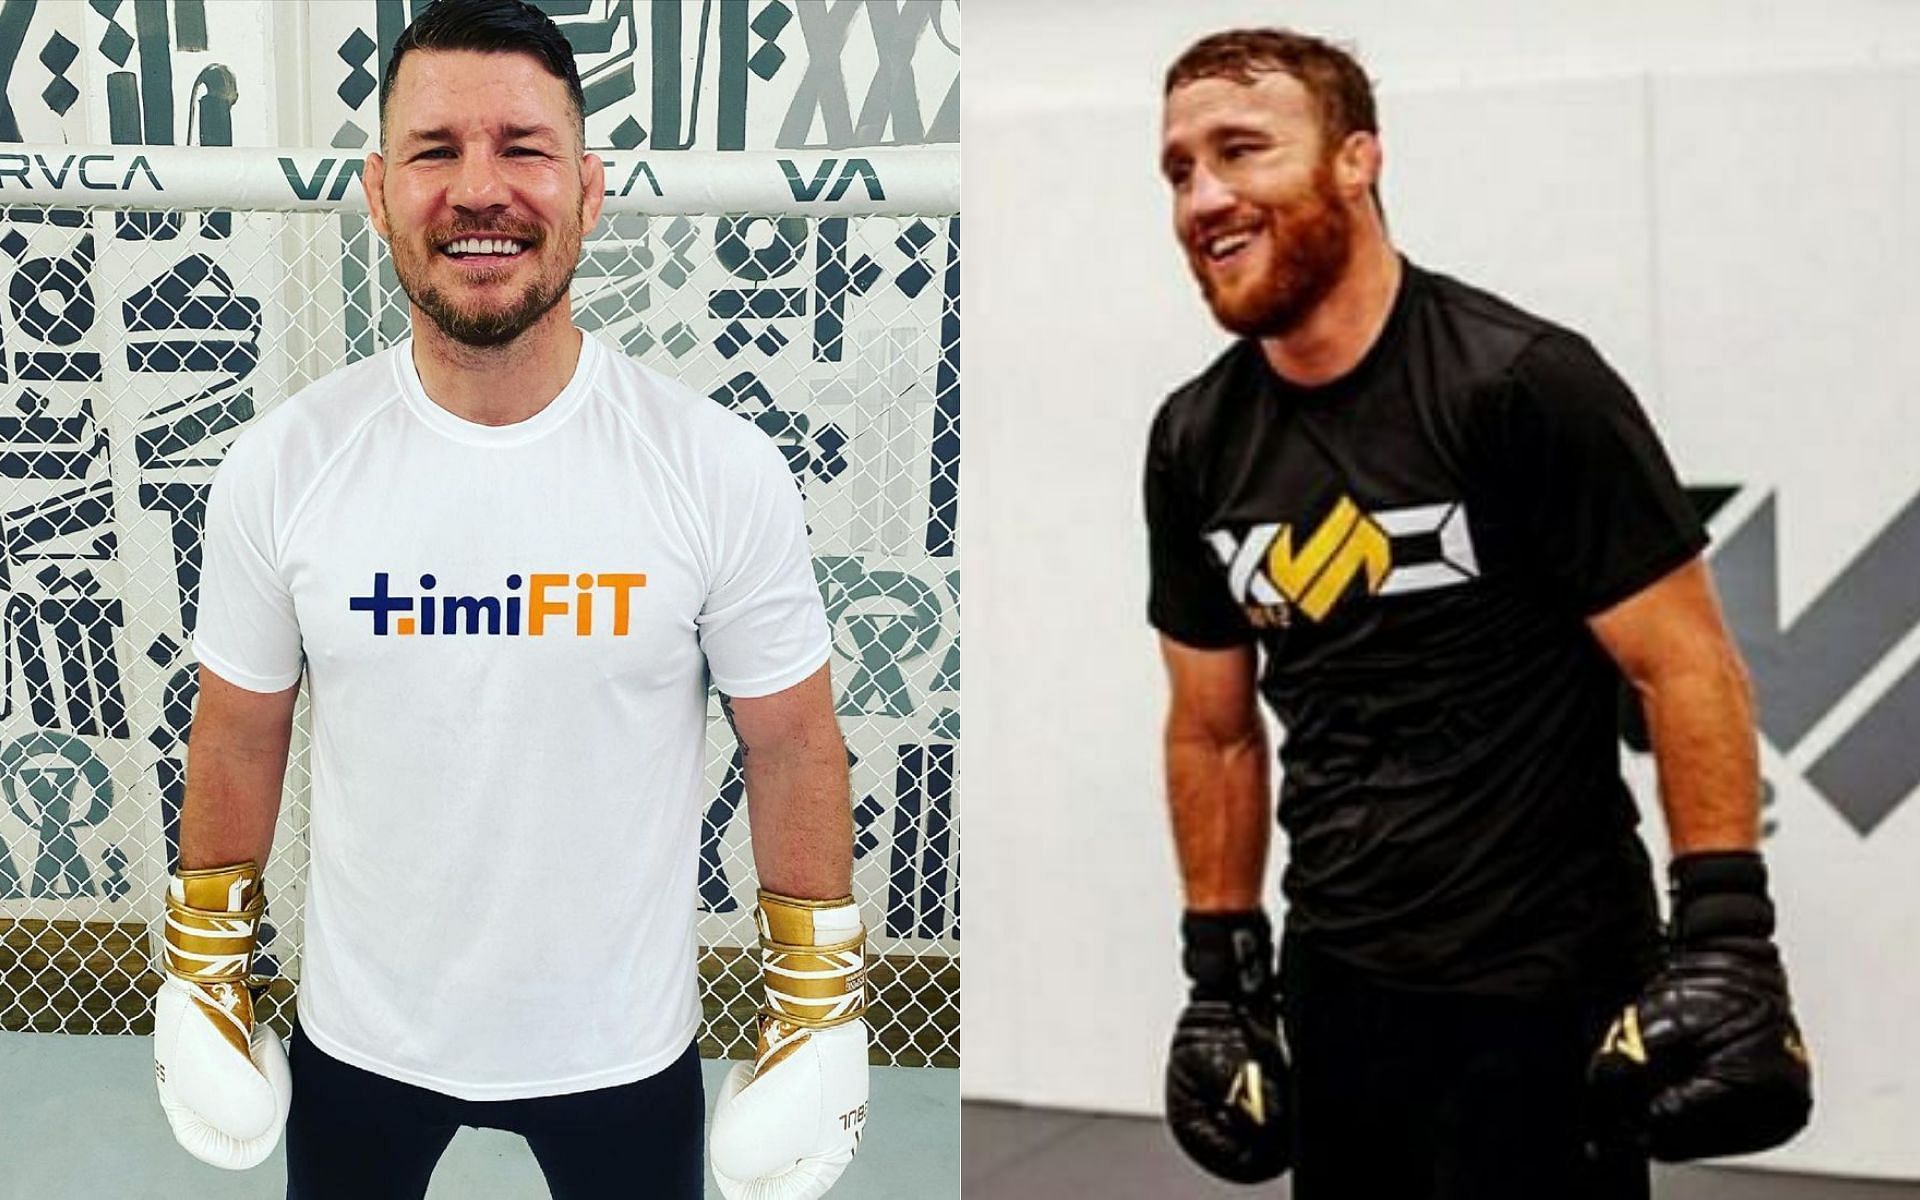 Michael Bisping (left) and Justin Gaethje (right) [Image credits: @mikebisping and @justin_gaethje on Instagram]